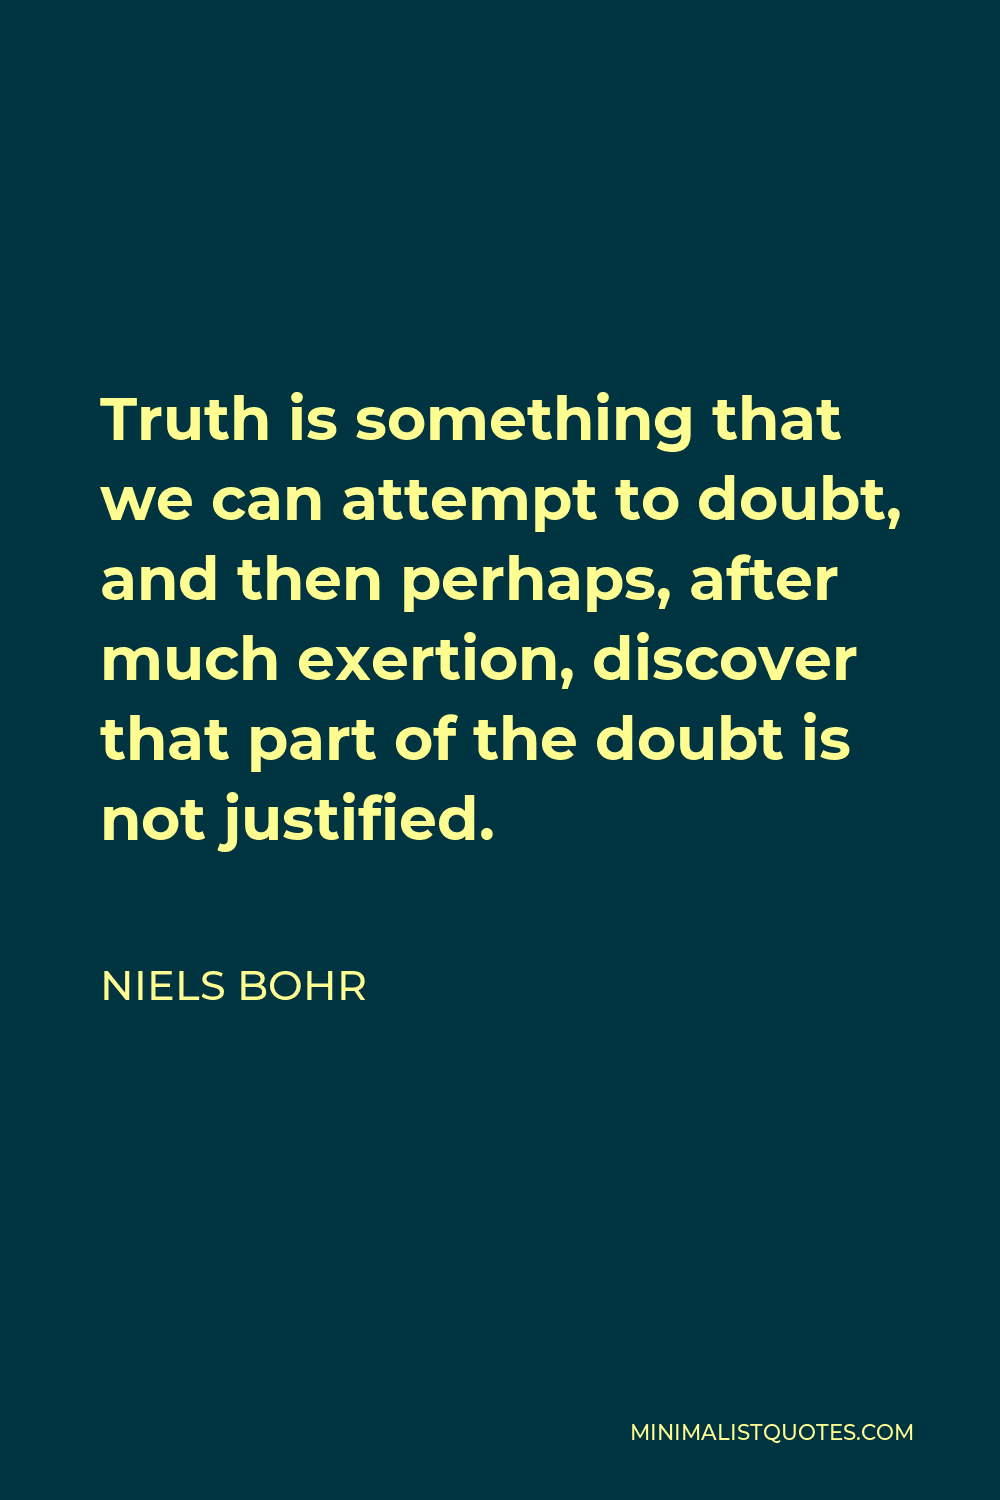 Niels Bohr Quote - Truth is something that we can attempt to doubt, and then perhaps, after much exertion, discover that part of the doubt is not justified.